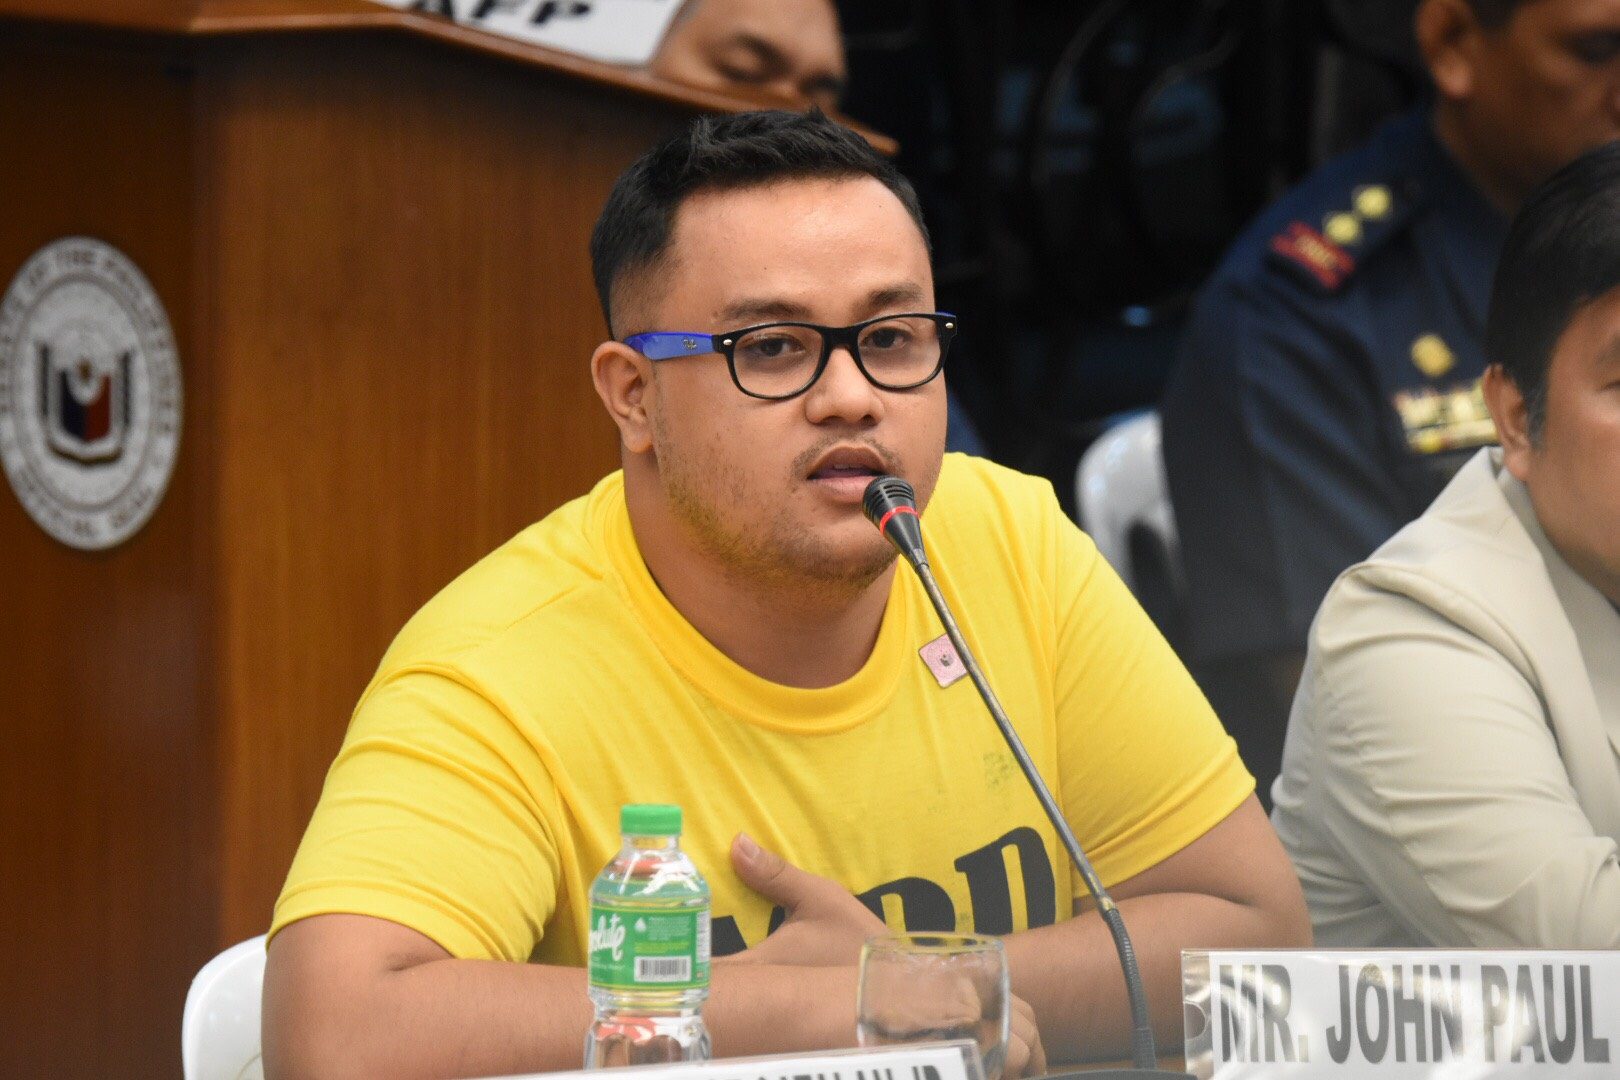 Solano claims Aegis Juris frat brother told him to lie to police